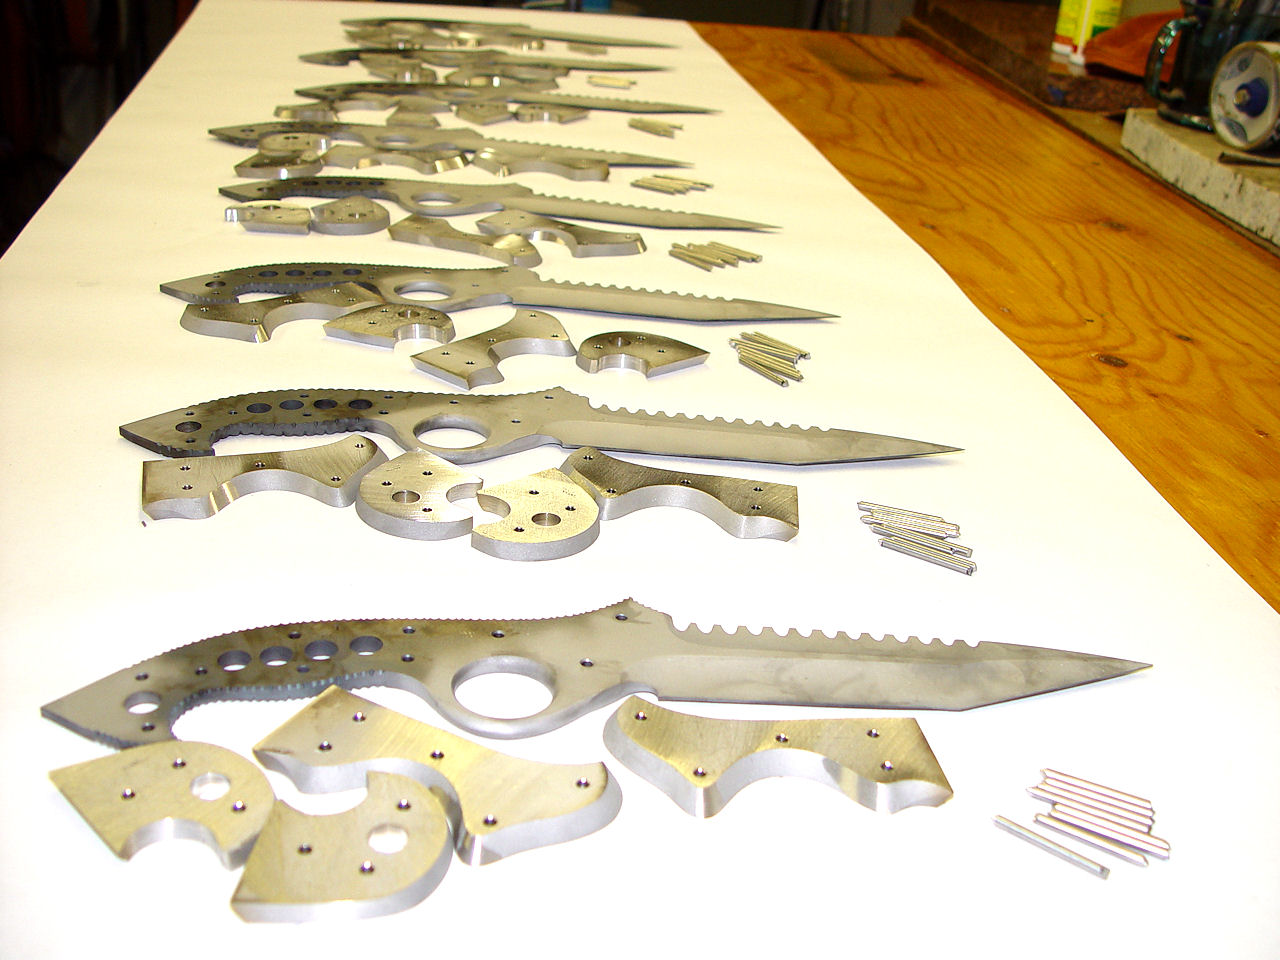 Group of "Ari B' Lilah custom made for counterterrorism unit, ready to attach 304 stainless steel bolsters